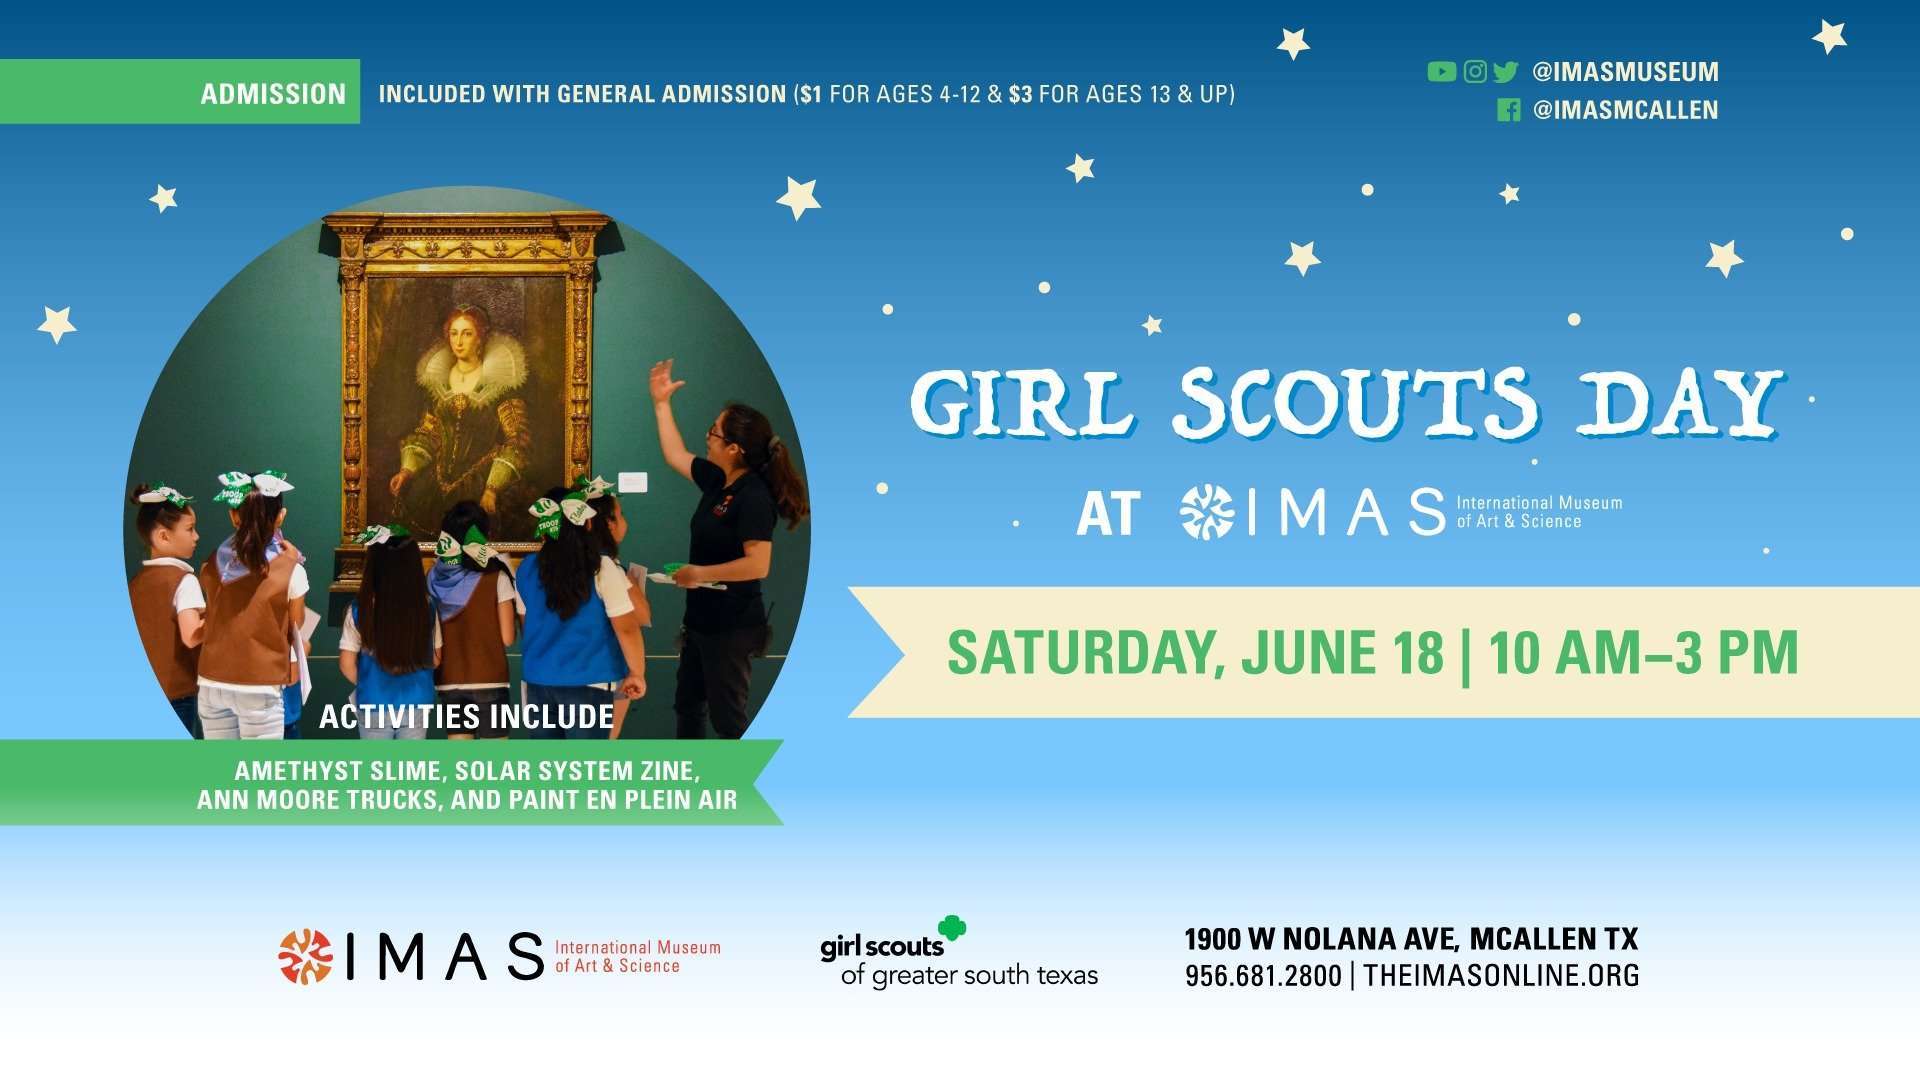 Girl Scouts Day at IMAS